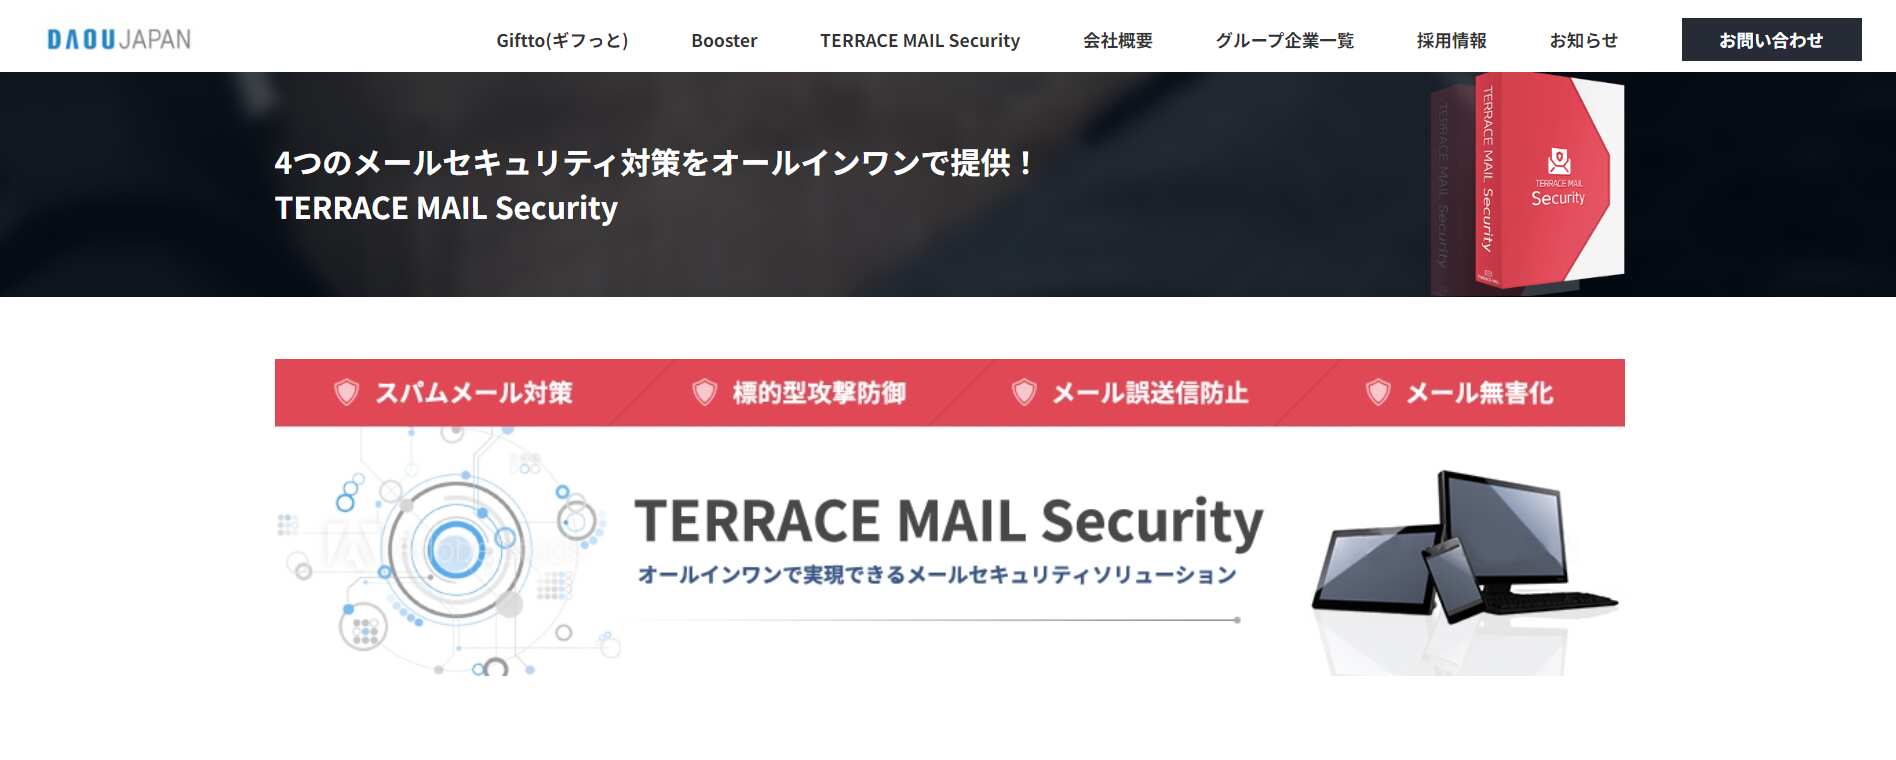 TERRACE MAIL Security